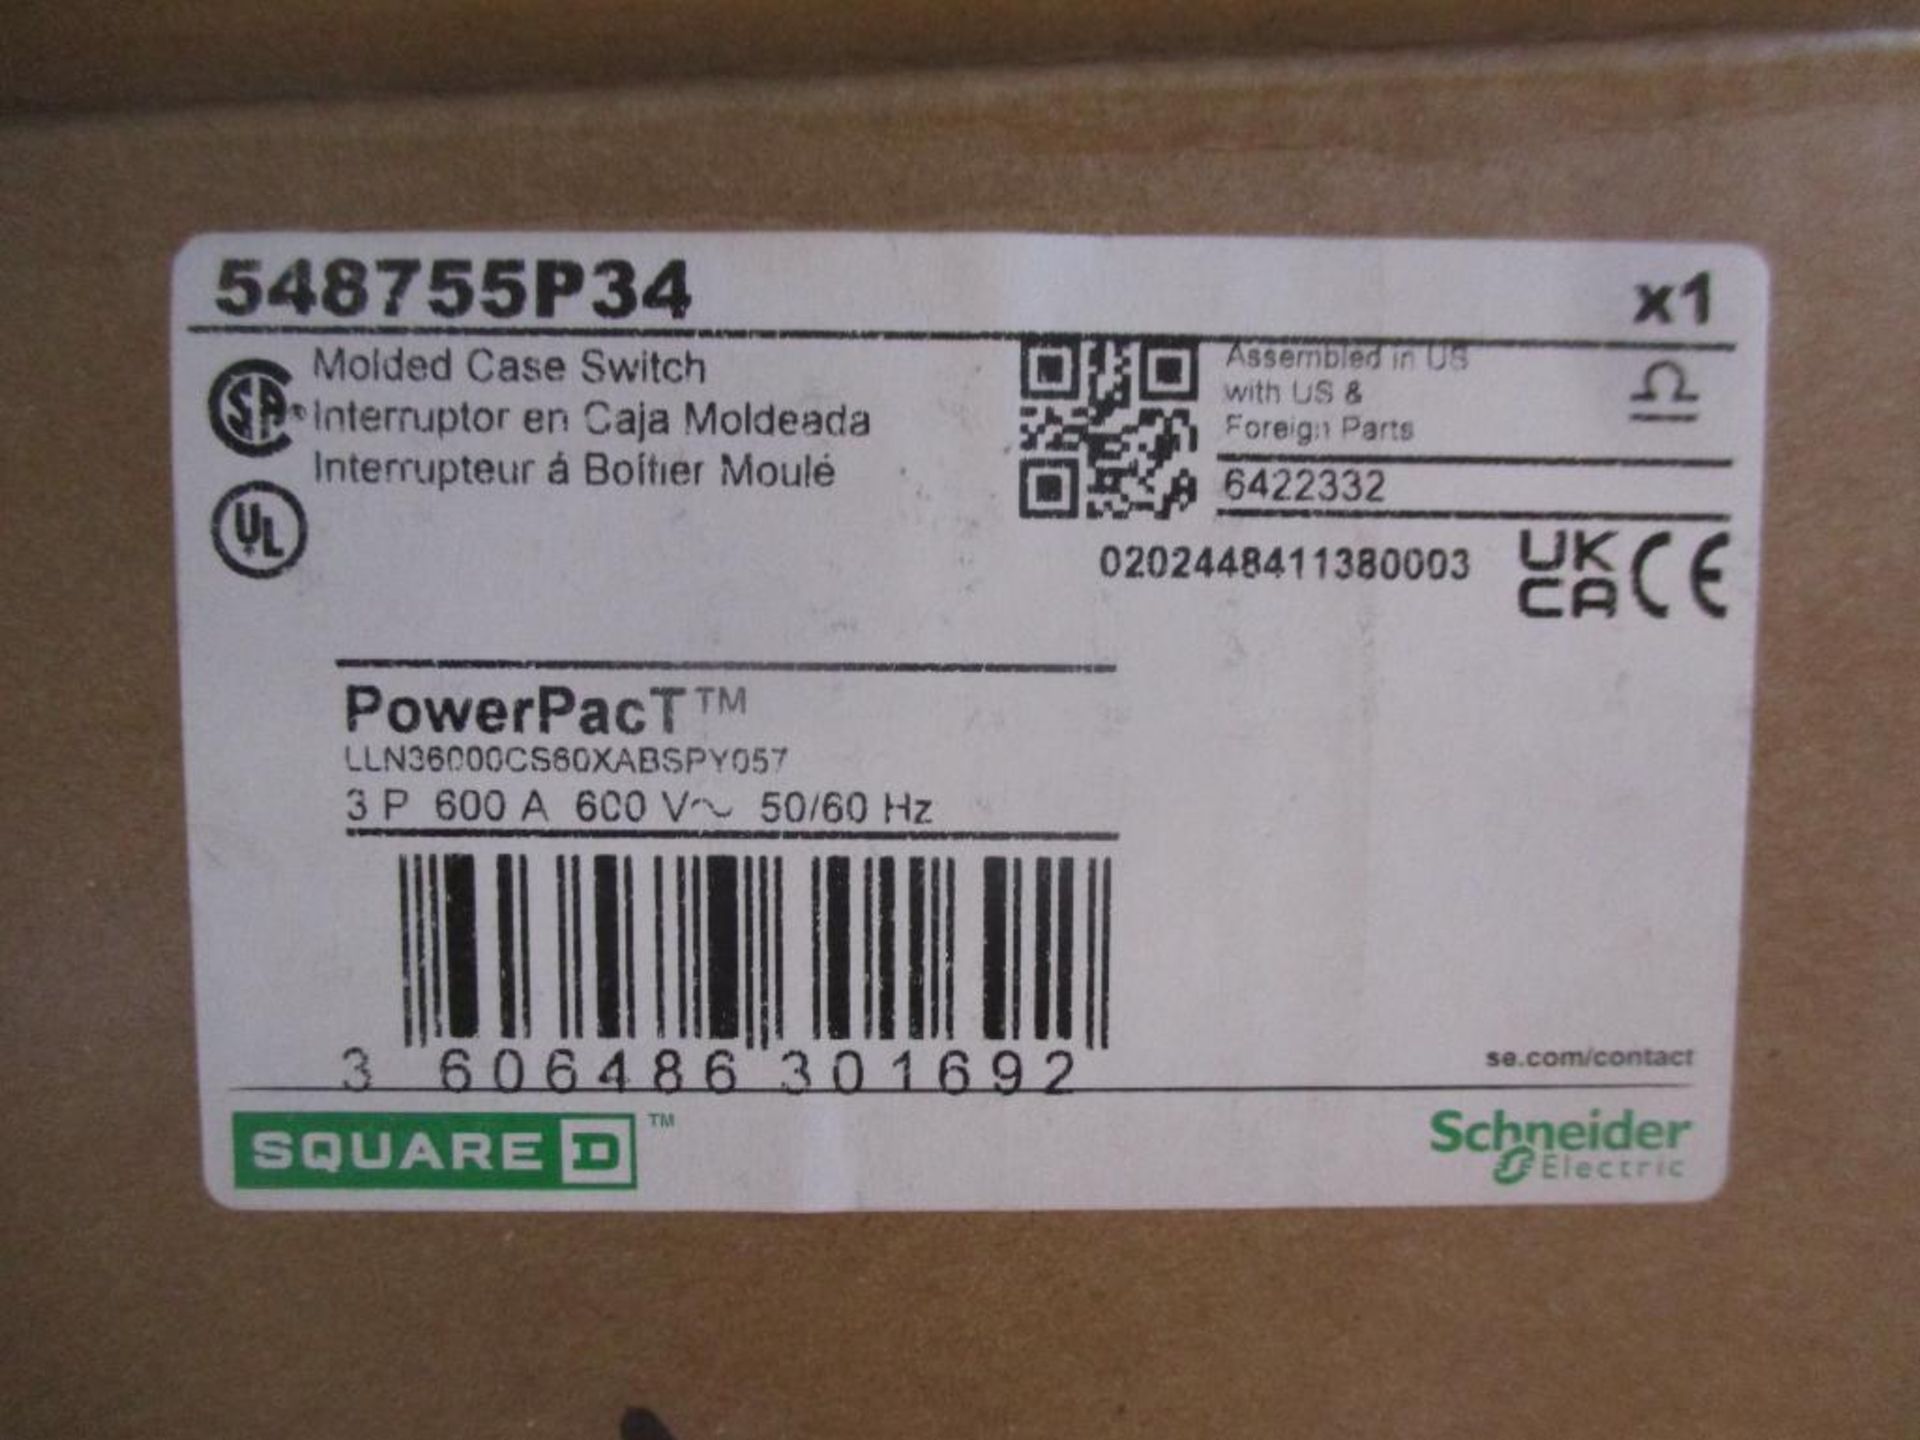 Square D 600 AMP Circuit Breaker, 548755P34, 600A, 3P, 600VAC, PowerPacT (New in Box) - Image 4 of 4